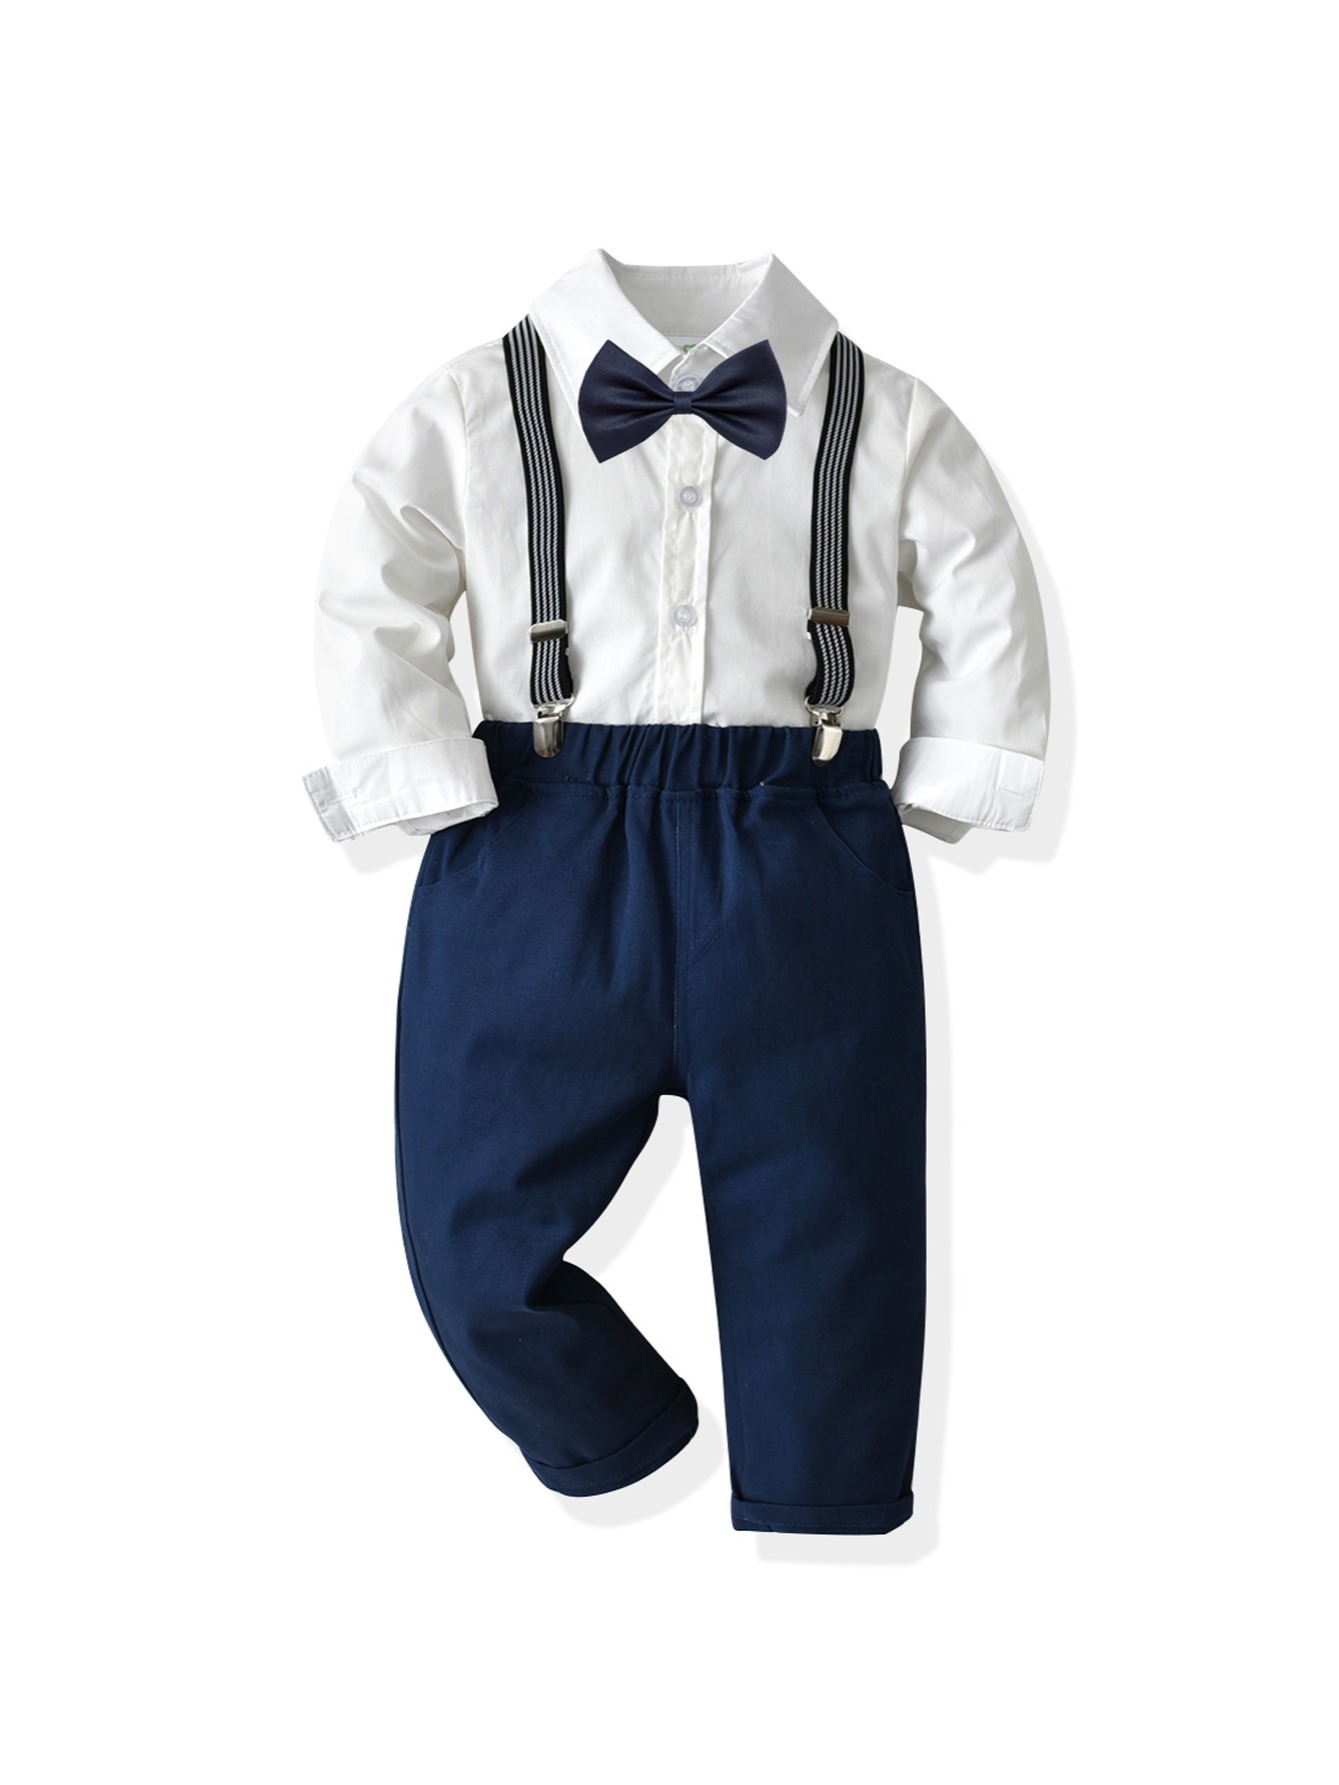 Formal Outfit, Gentleman Outfit First Birthday, Wedding, Boys Clothing,  Boys Formal Wear, Special Occasion, Best Man Outfit